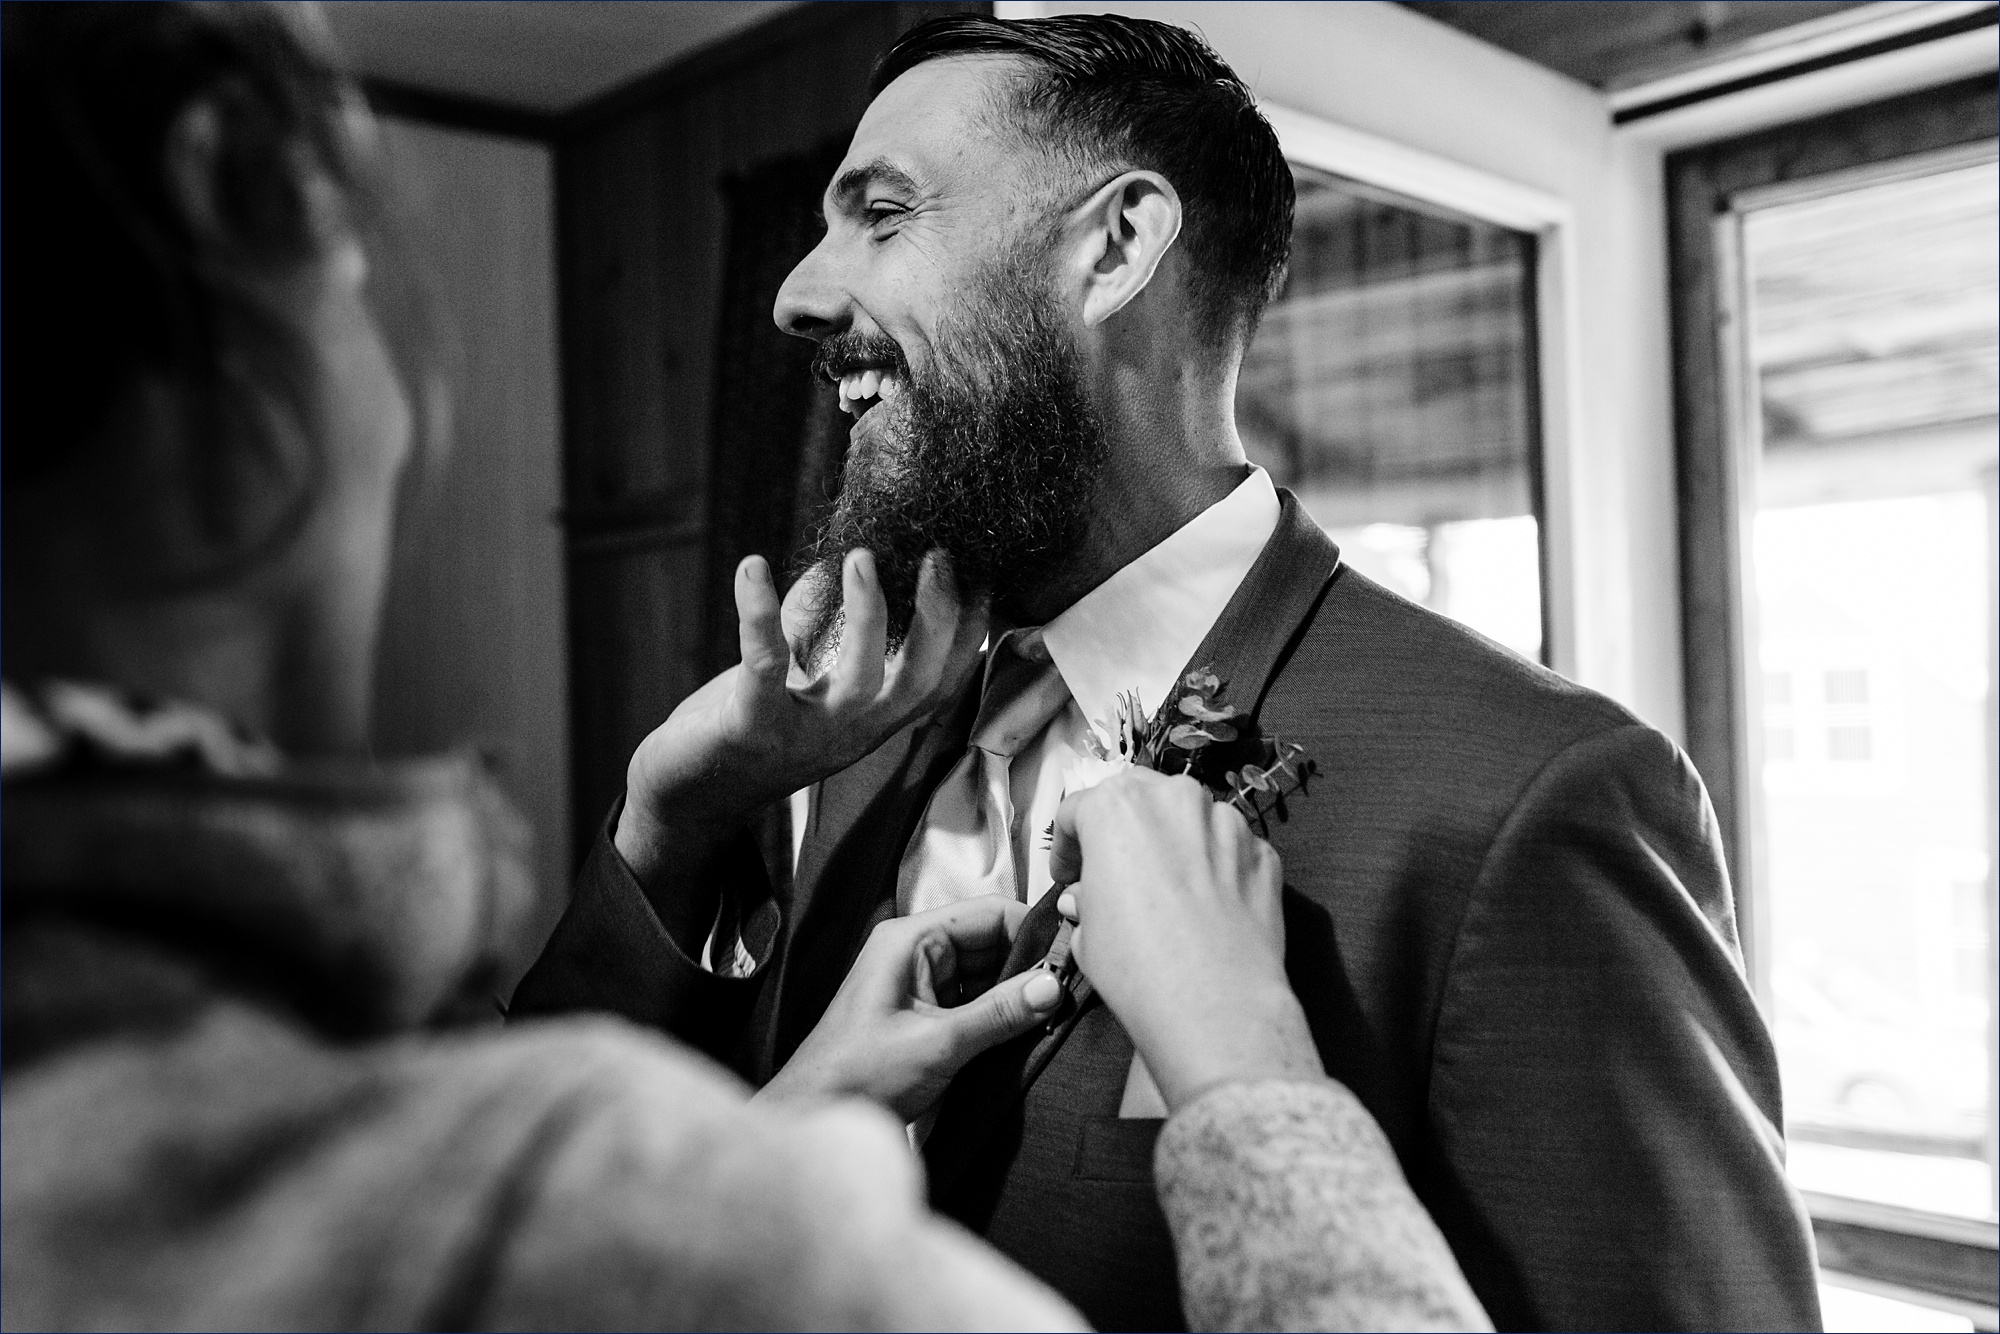 The groom gets all ready with his energetic group of friends on the wedding day